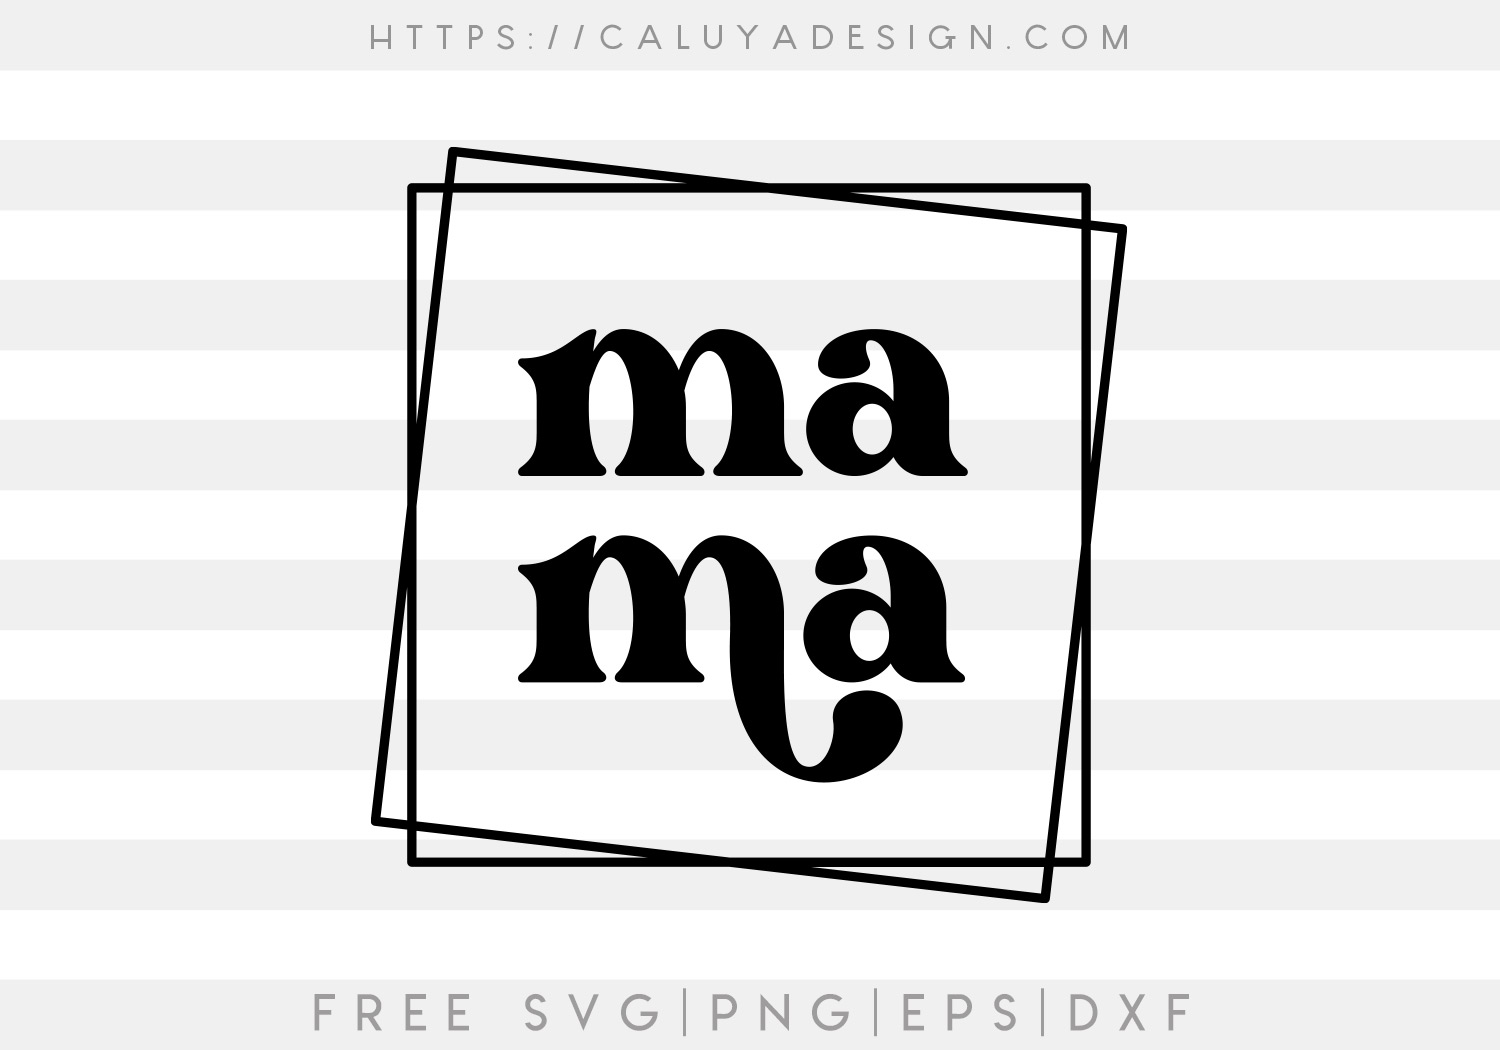 Download 45 Free Mom Themed Svg You Need To Download Now